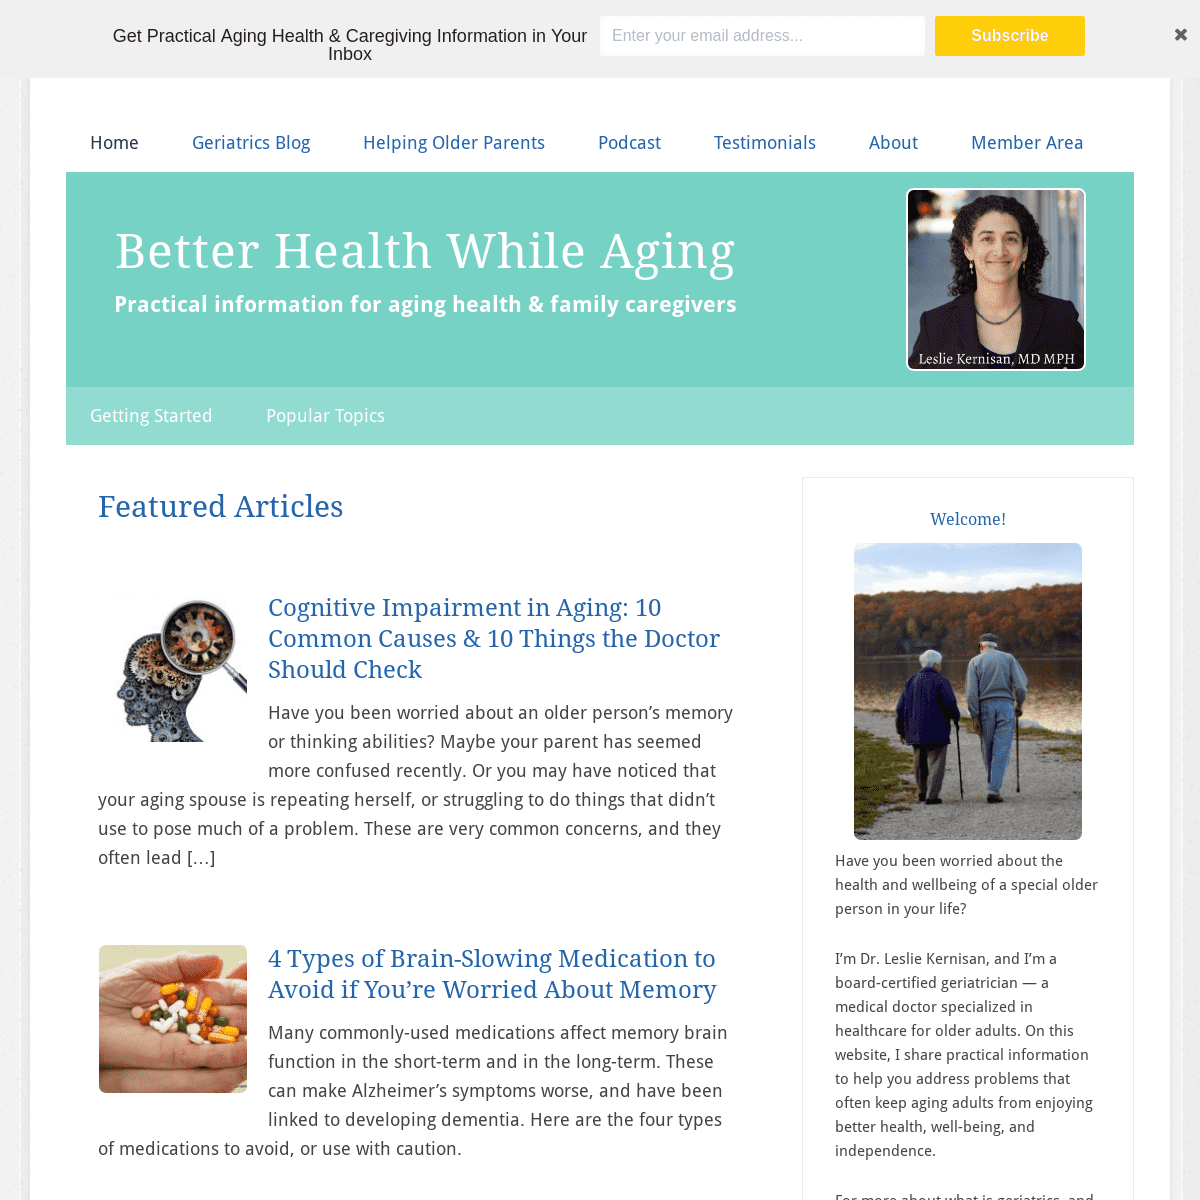 A complete backup of betterhealthwhileaging.net